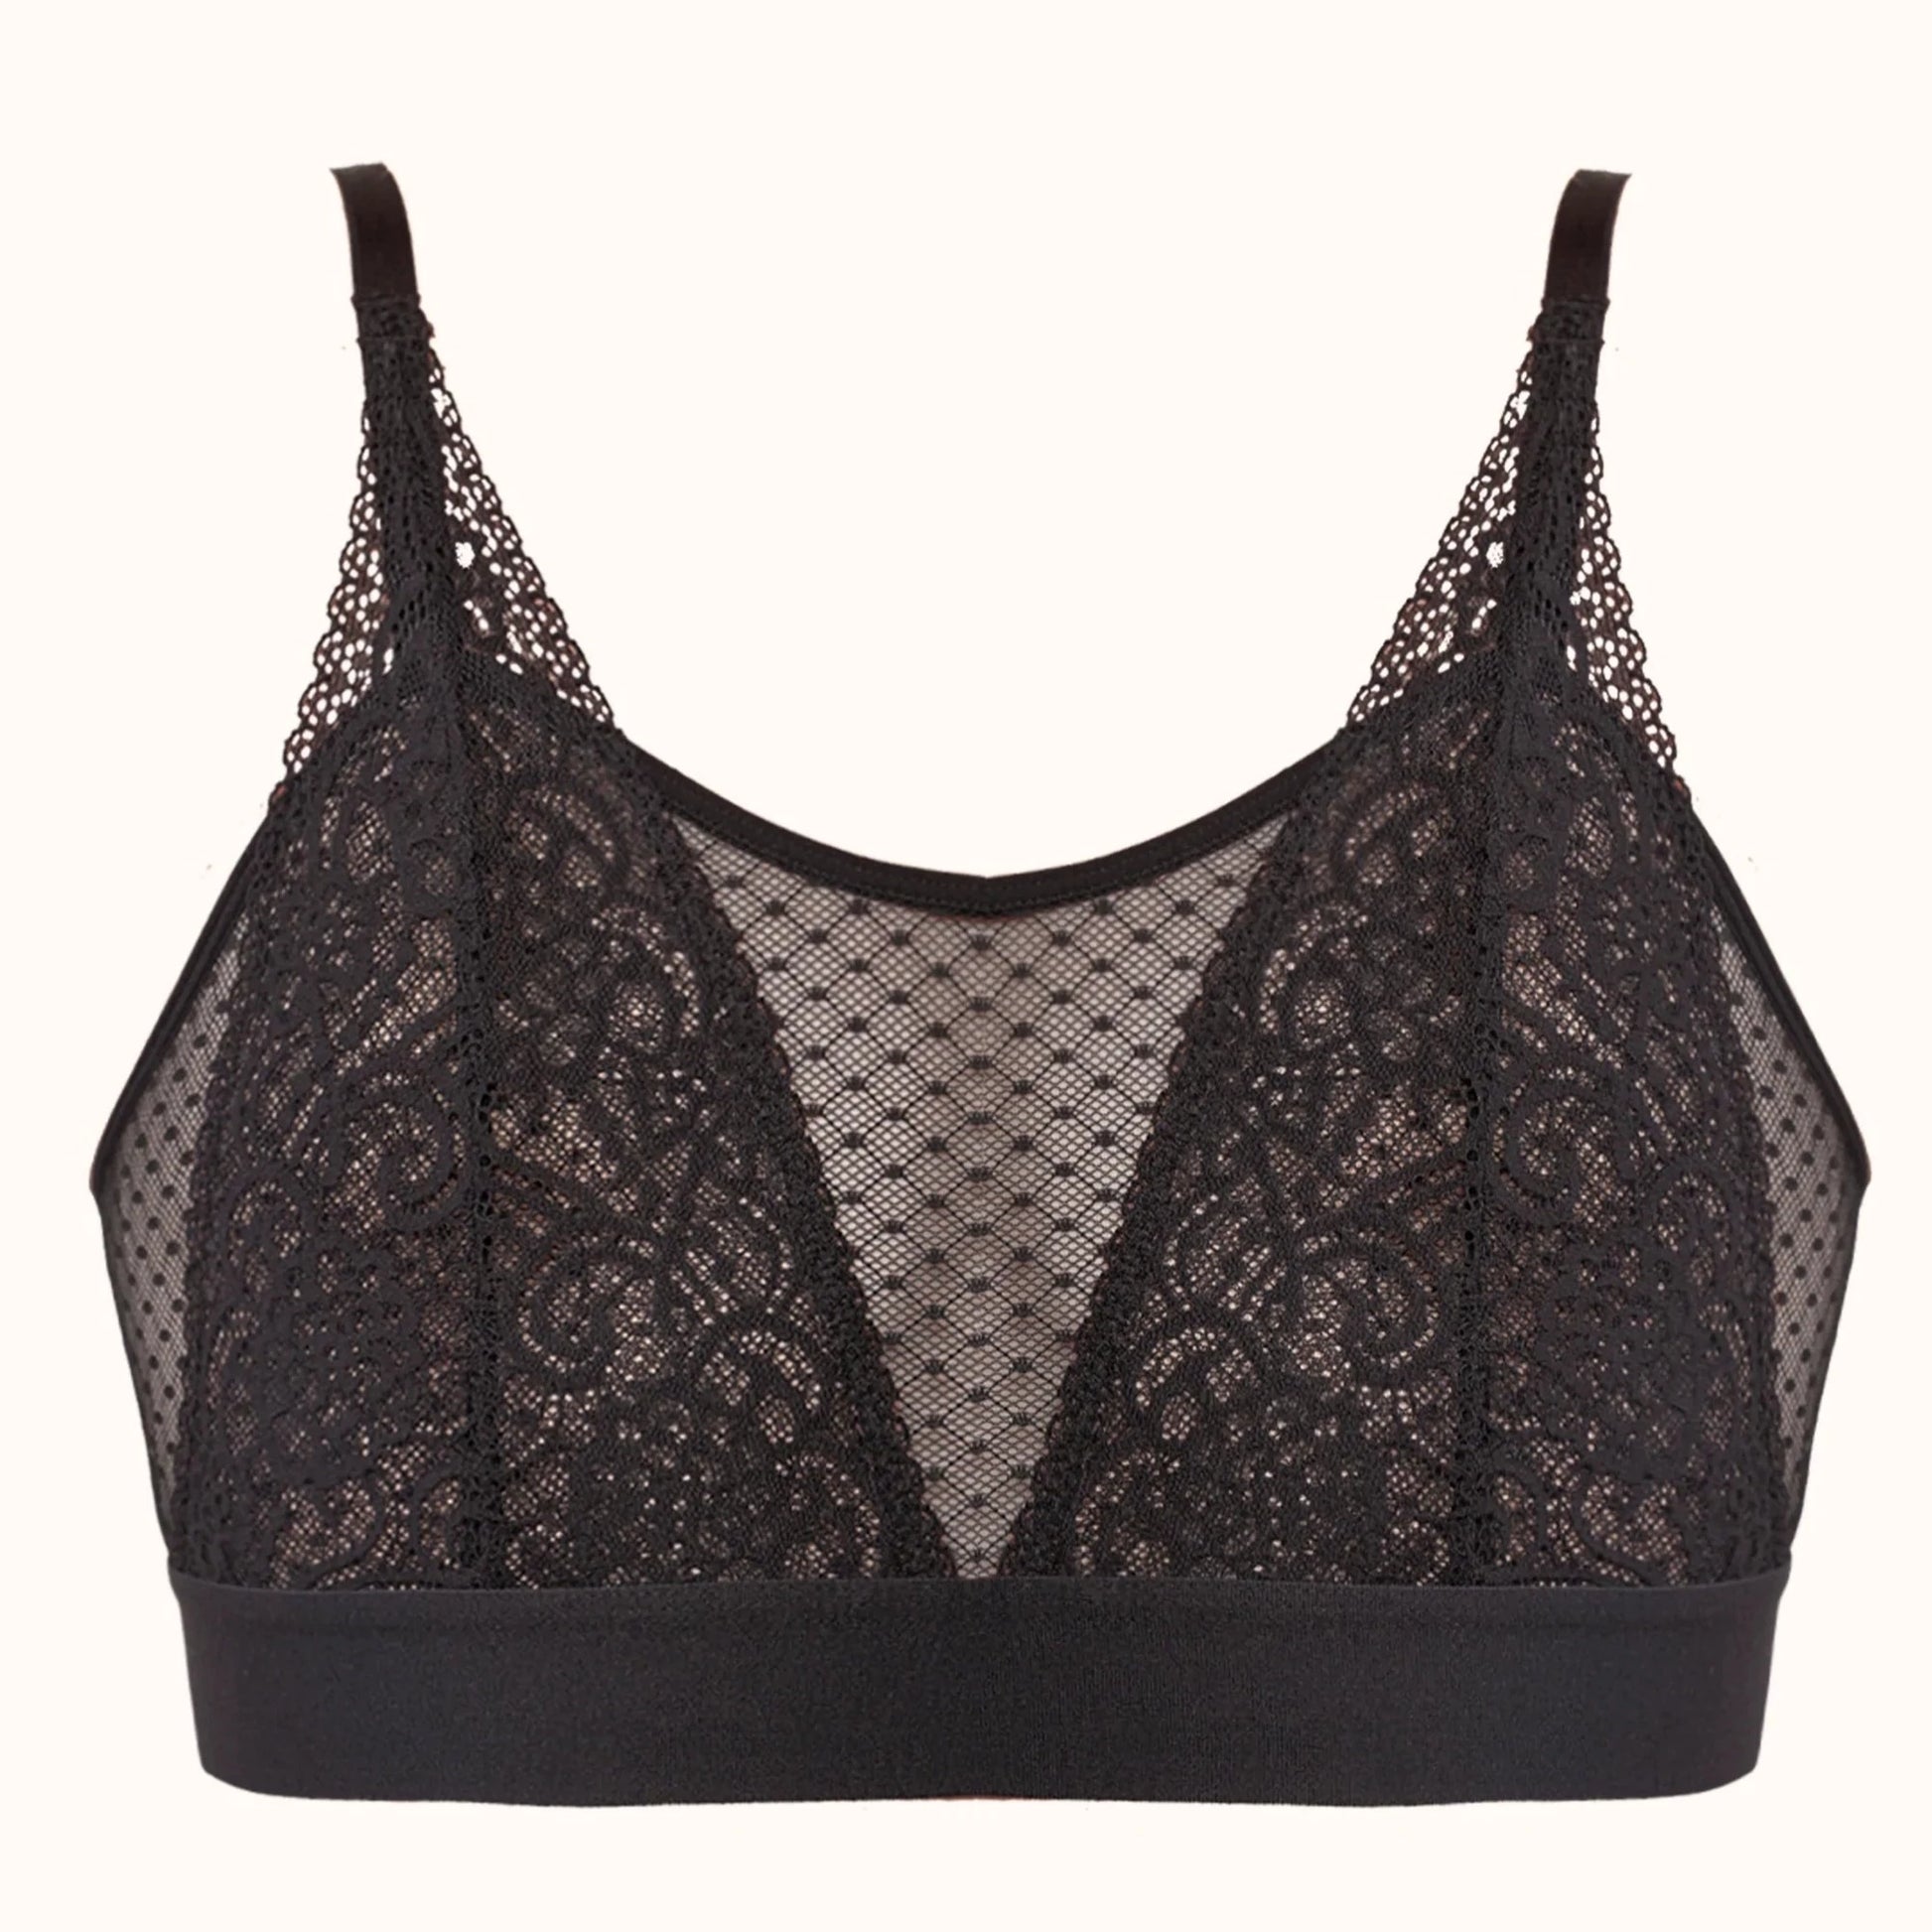 Maggie Lace Bralette in Black | AnaOno | Soft post-surgery bras made just for those affected by breast cancer, breast surgeries or discomfort.